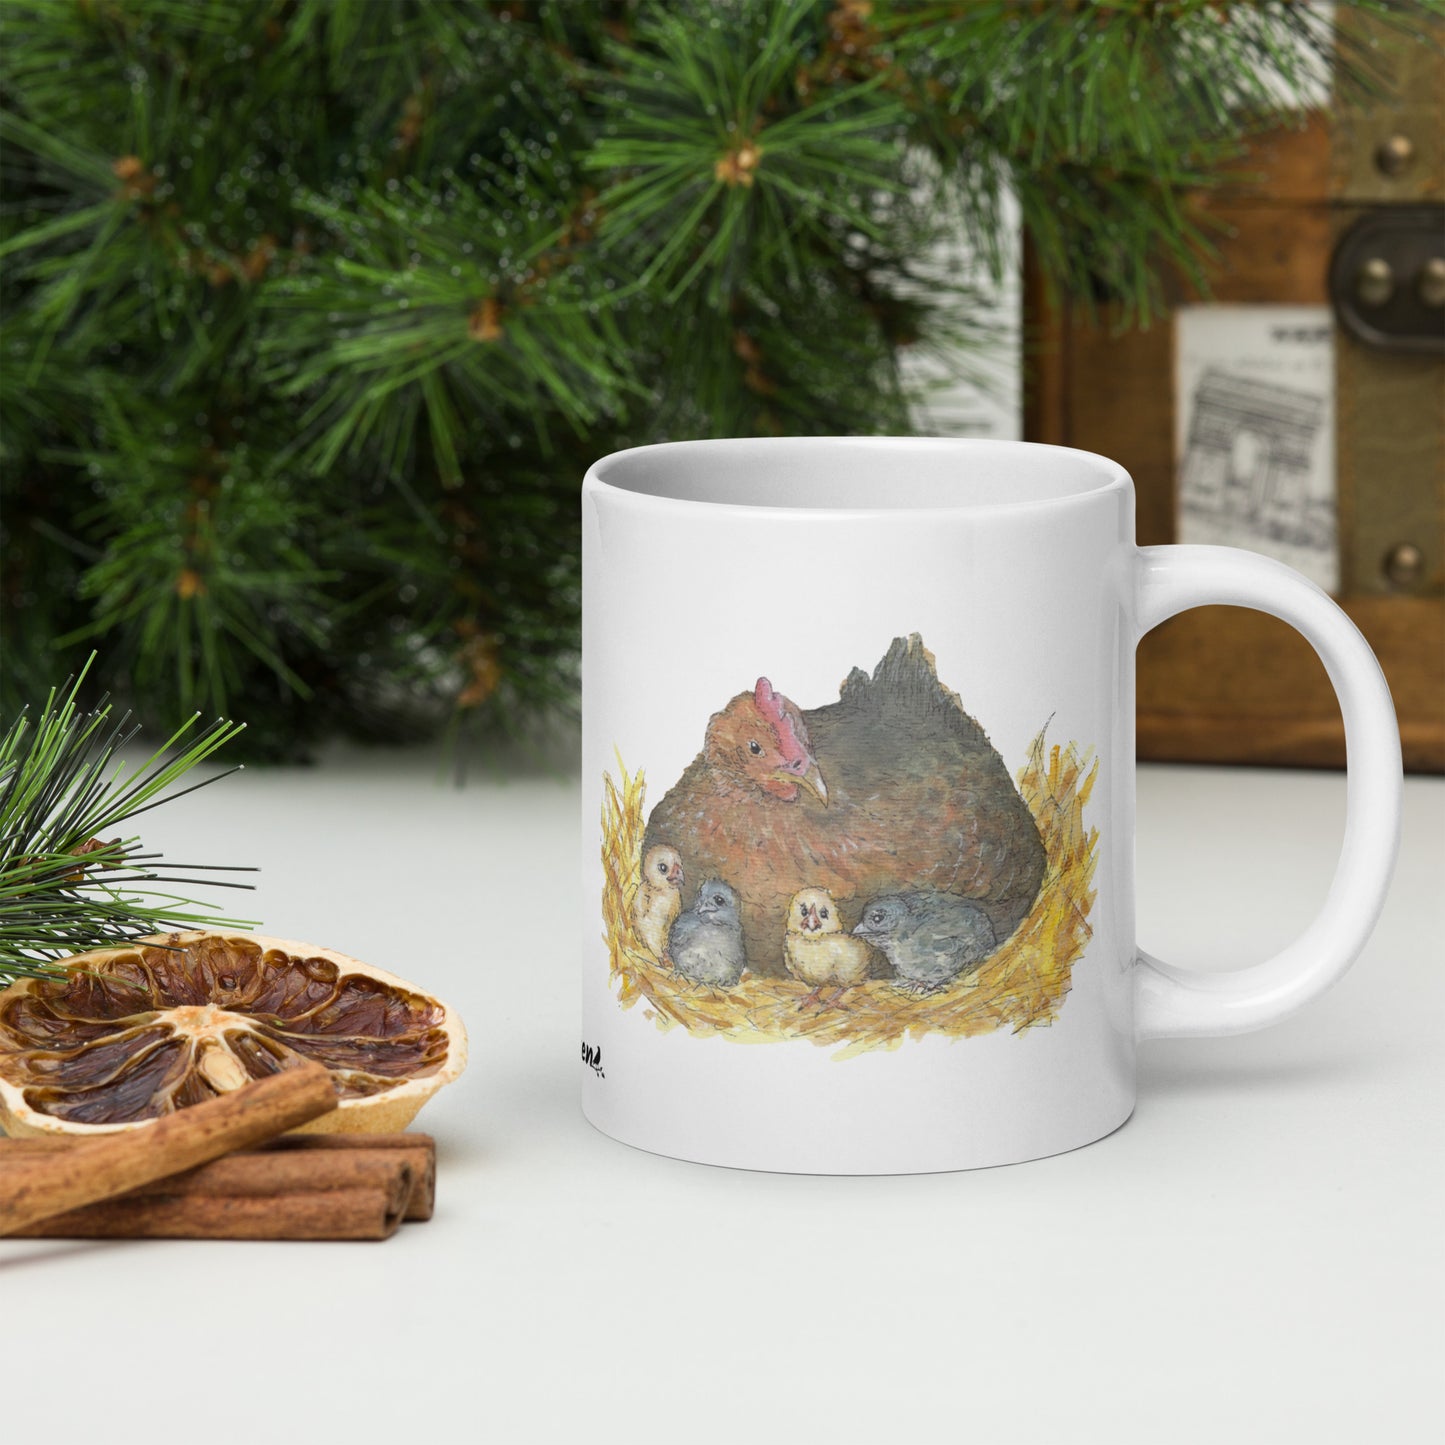 20 ounce white ceramic mug. Features double-sided print of a watercolor mother hen and chicks. Dishwasher and microwave safe. Shown sitting by dried citrus slices and pine boughs.